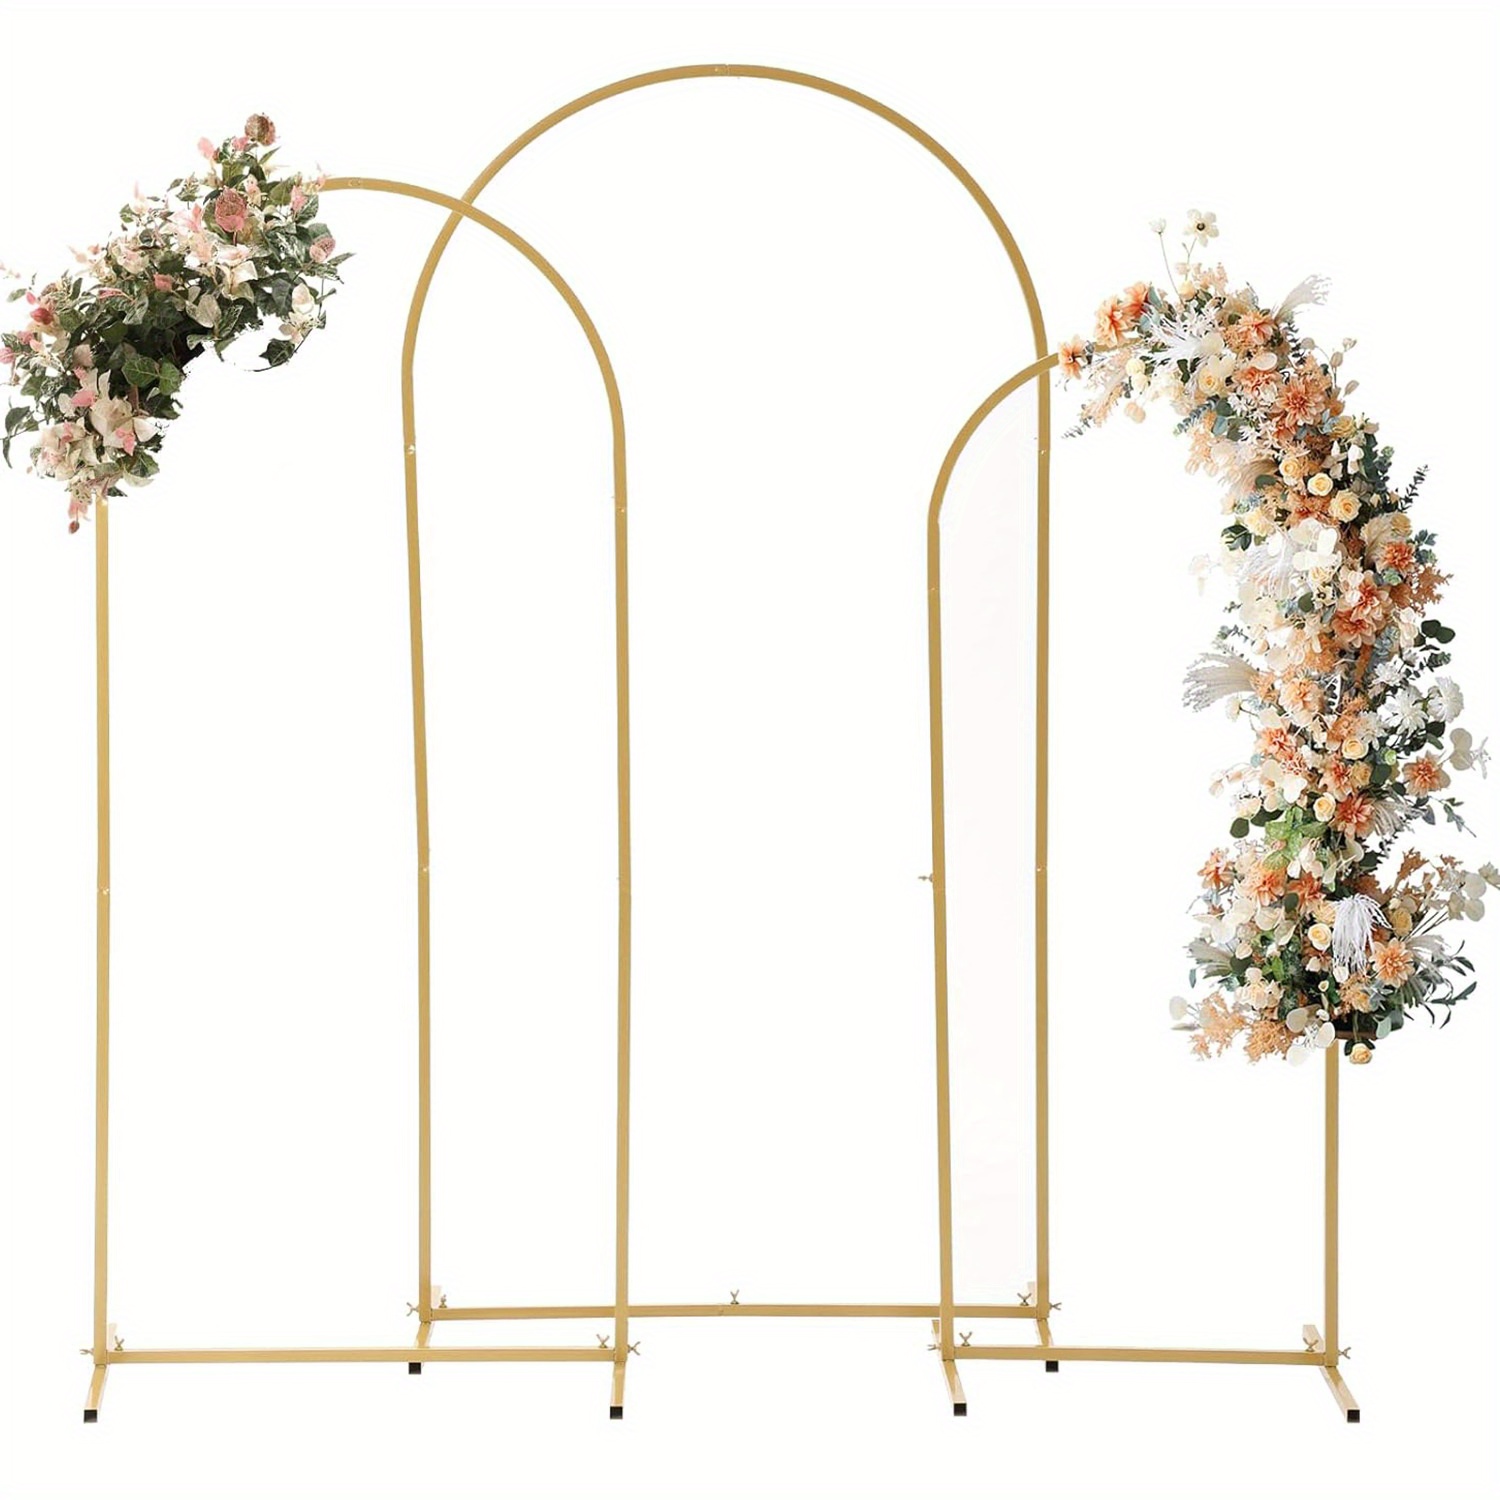 

3pcs (7.2ft+6.6ft+6ft) Arch Backdrop Stand Wedding Arches For Ceremony Metal Gold Balloon Arch Frame Stand Garden Flower Balloon Arch For Birthday Bridal Party Arch Decoration